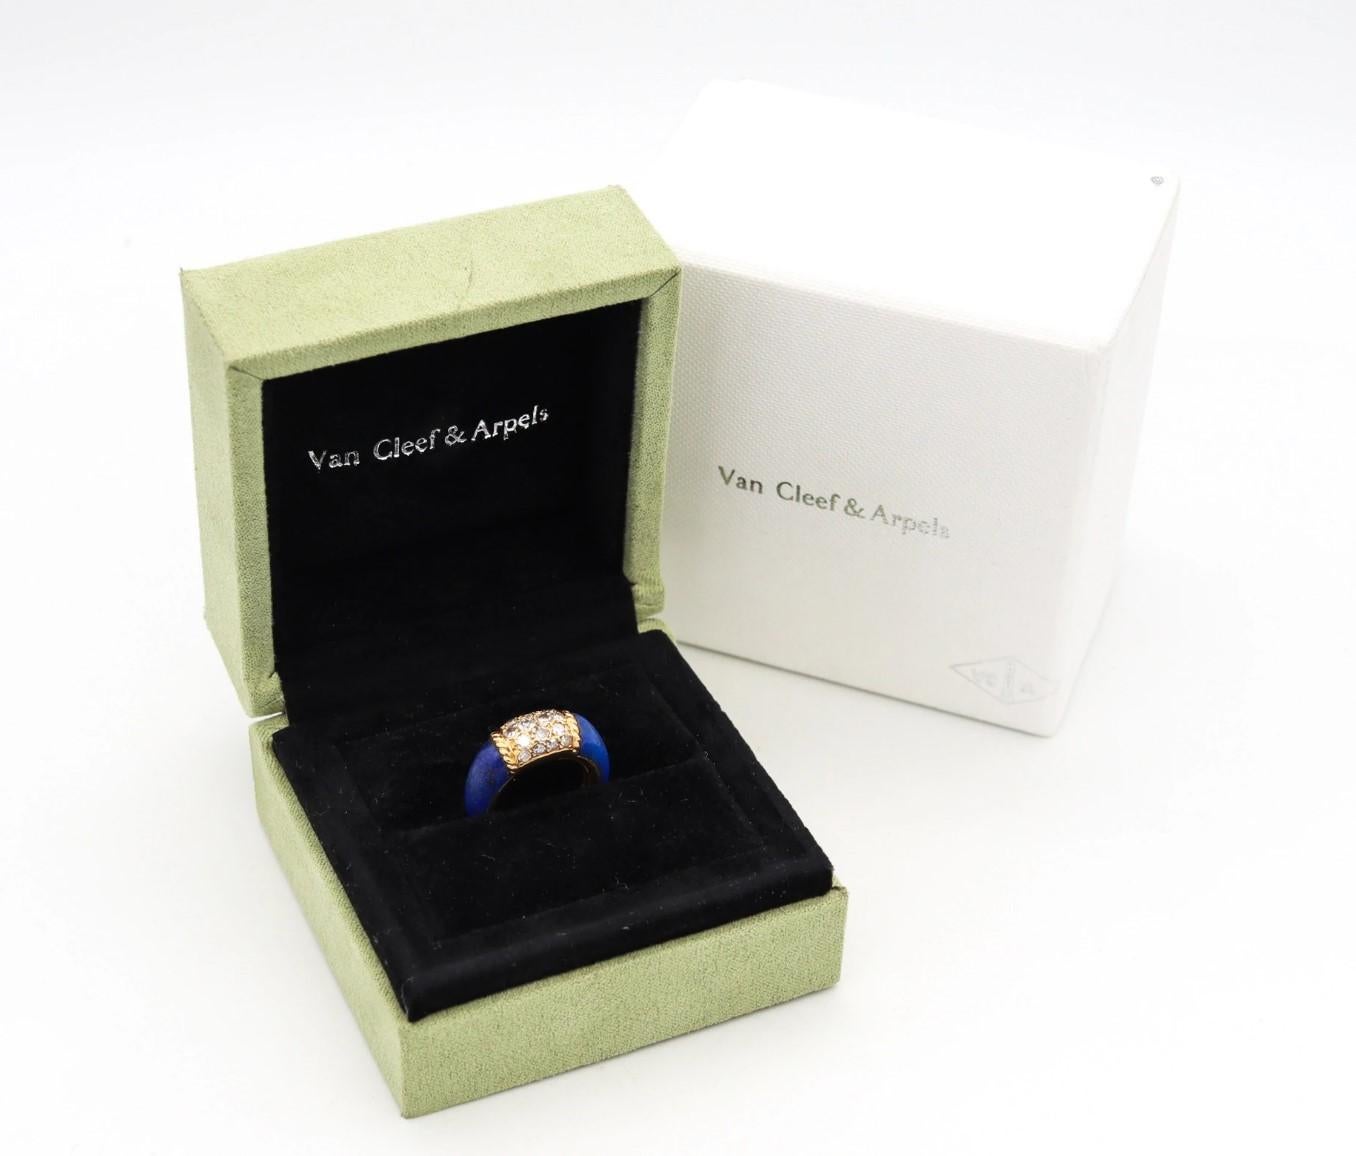 Classic Philippines ring designed by Van Cleef & Arpels.

A vintage ring manufactured in Paris, France by the house of Van Cleef & Arpels, back in the 1960's. This colorful Philippines ring has been crafted in solid yellow gold of 18 karats, with